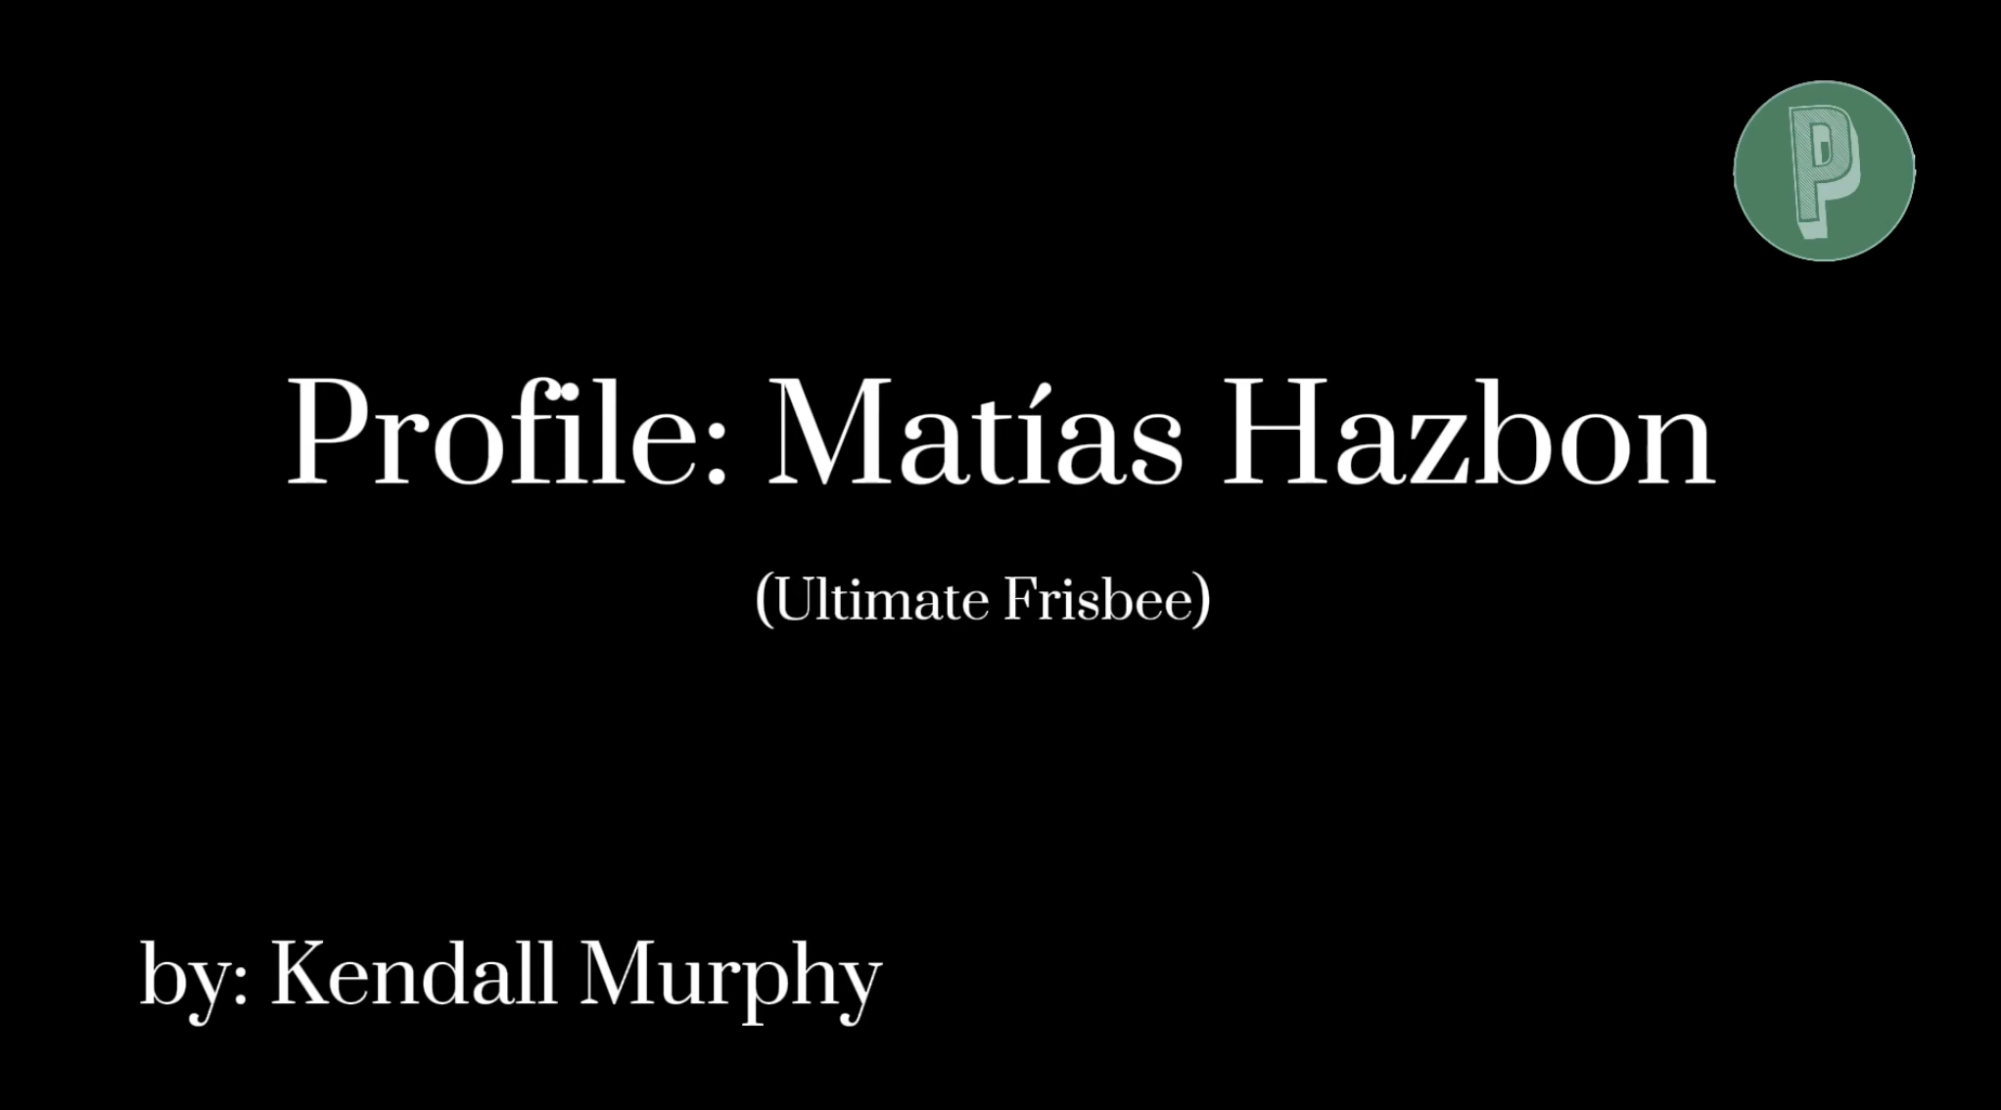 One on one with Matias Hazbon of the ultimate frisbee team